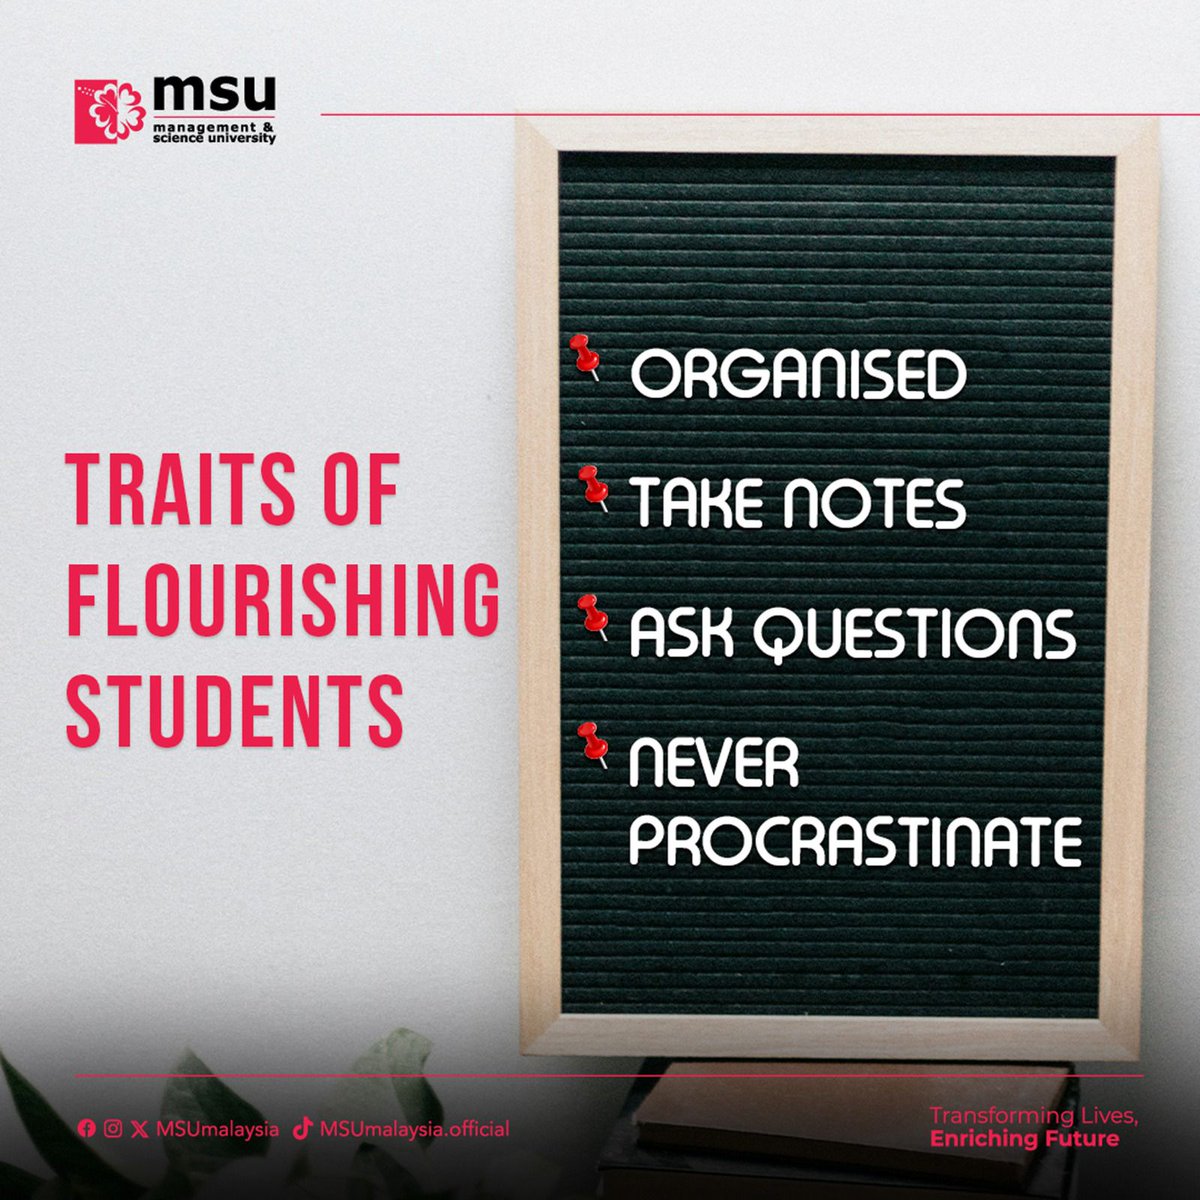 Success stems from habits. Try practicing these habits and see how they change you. #MSUmalaysia #TipsTuesday